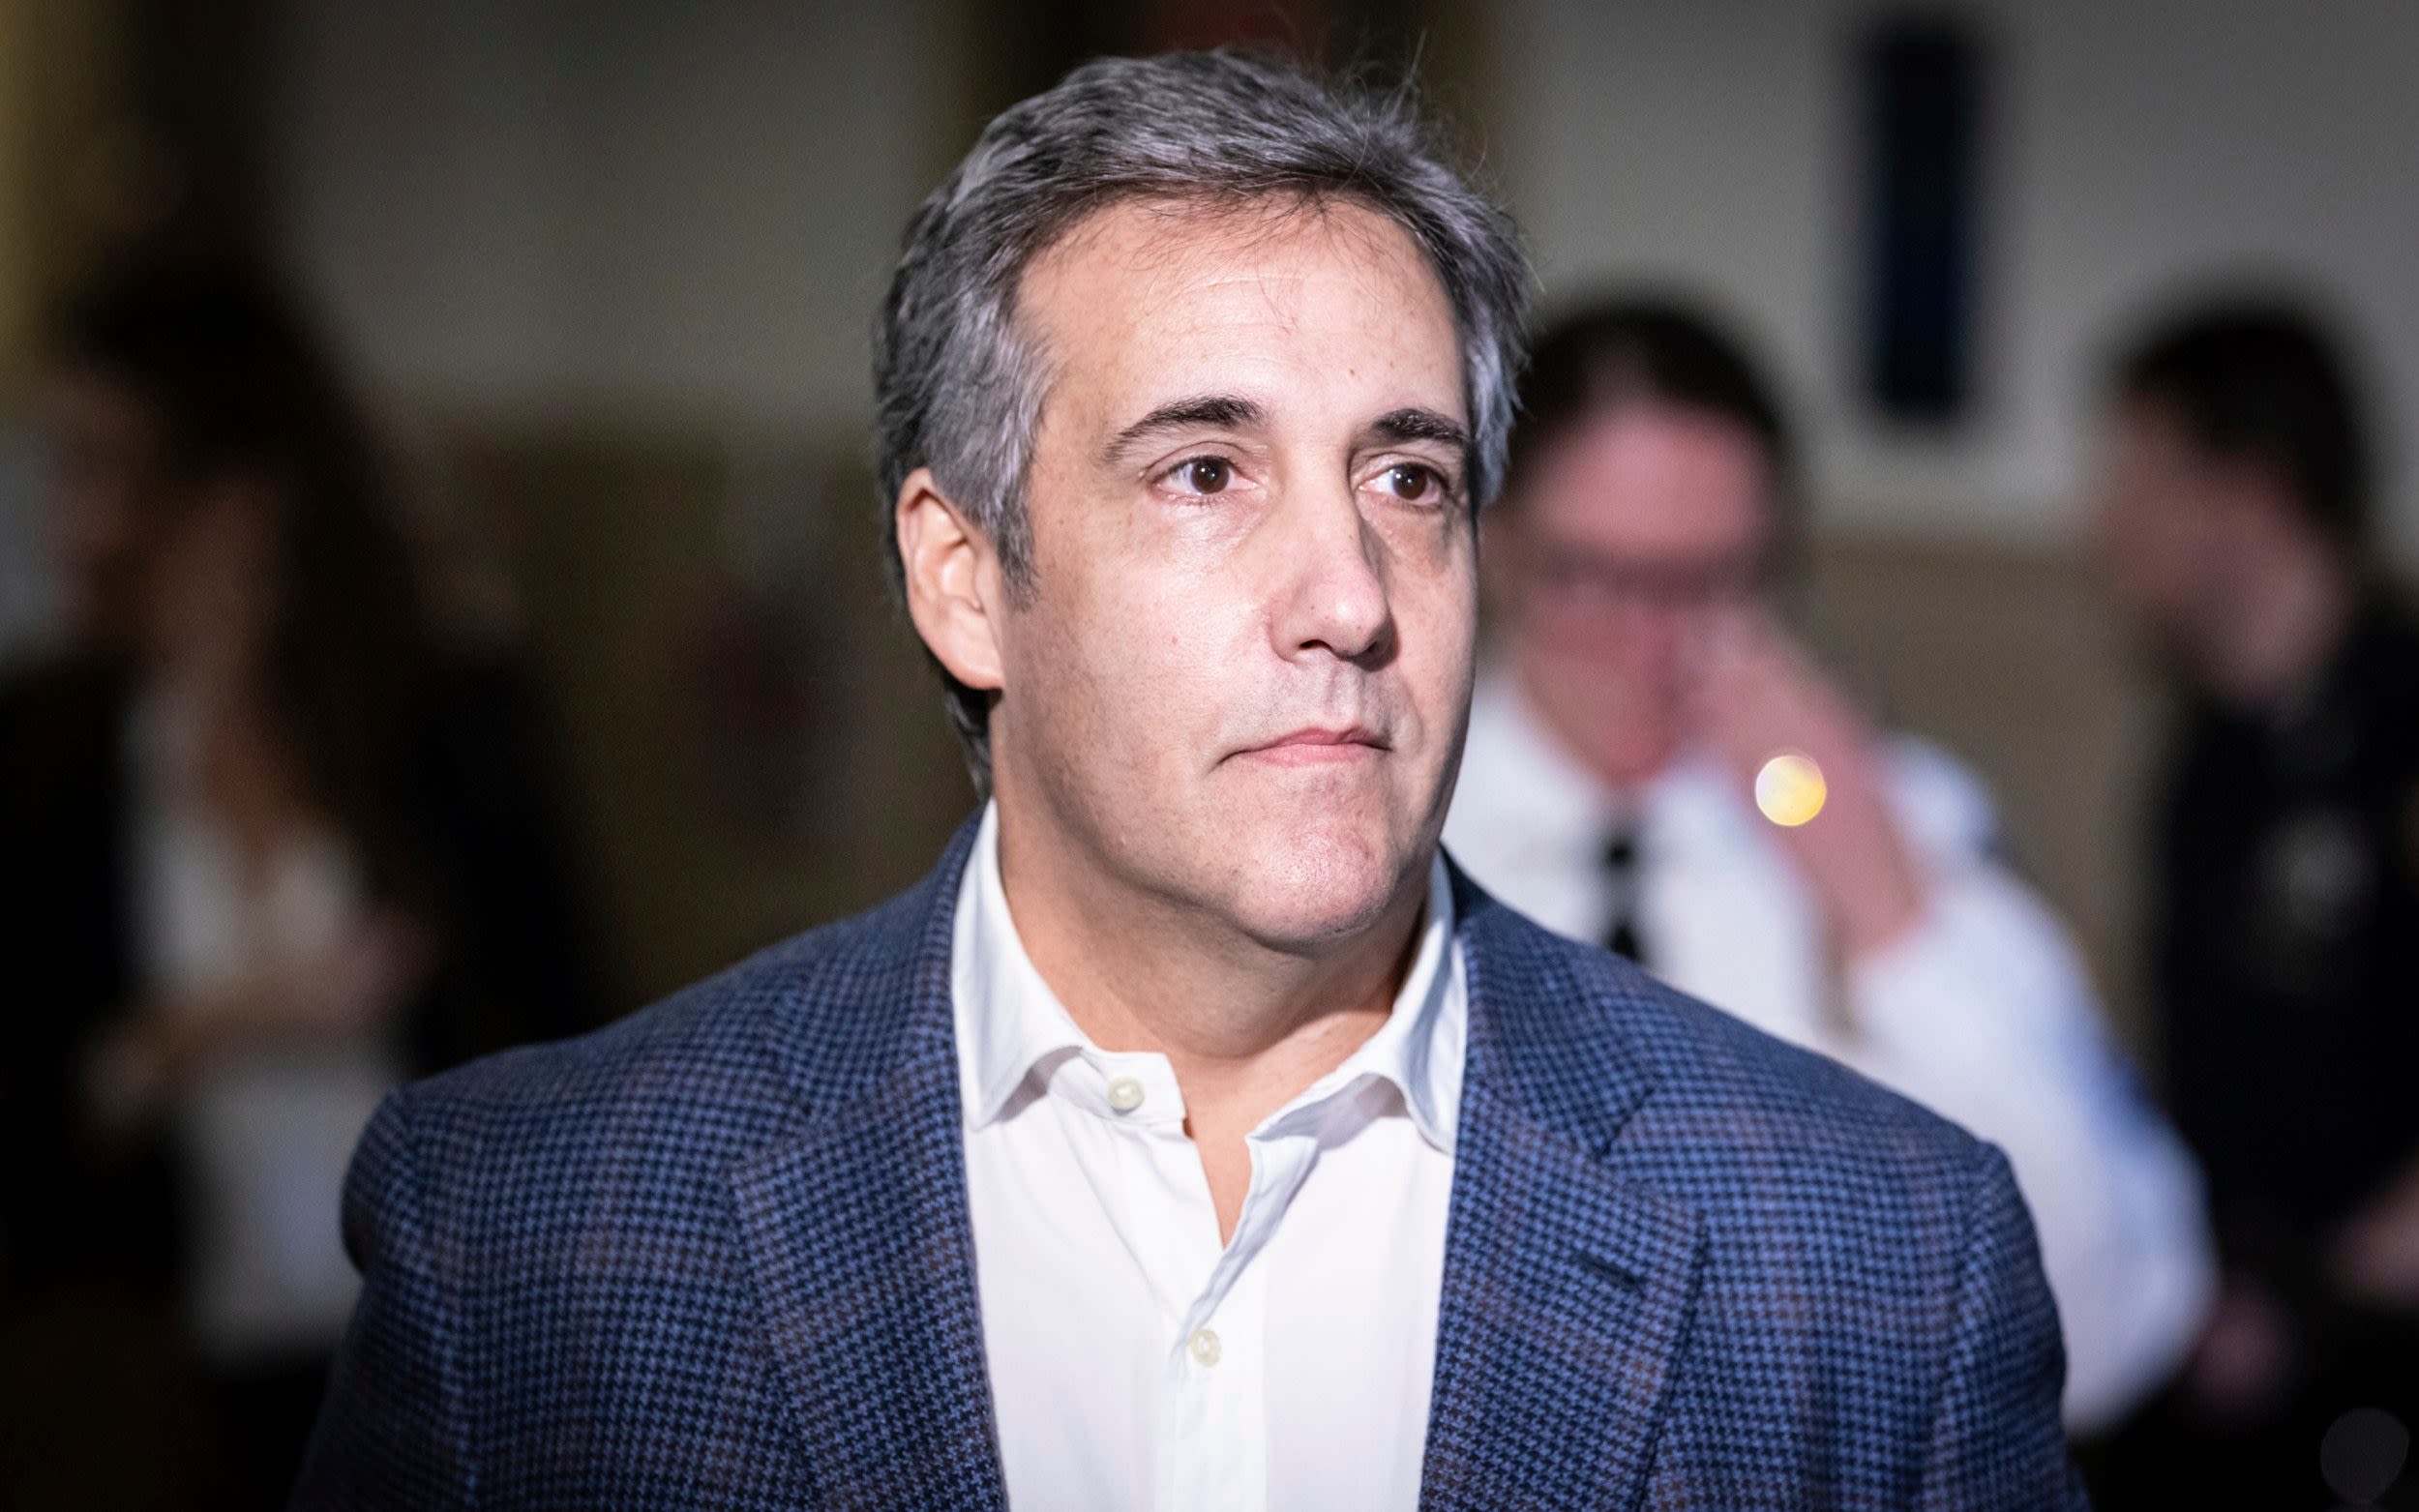 Trump ‘belongs in a f--king cage’, says former fixer Michael Cohen